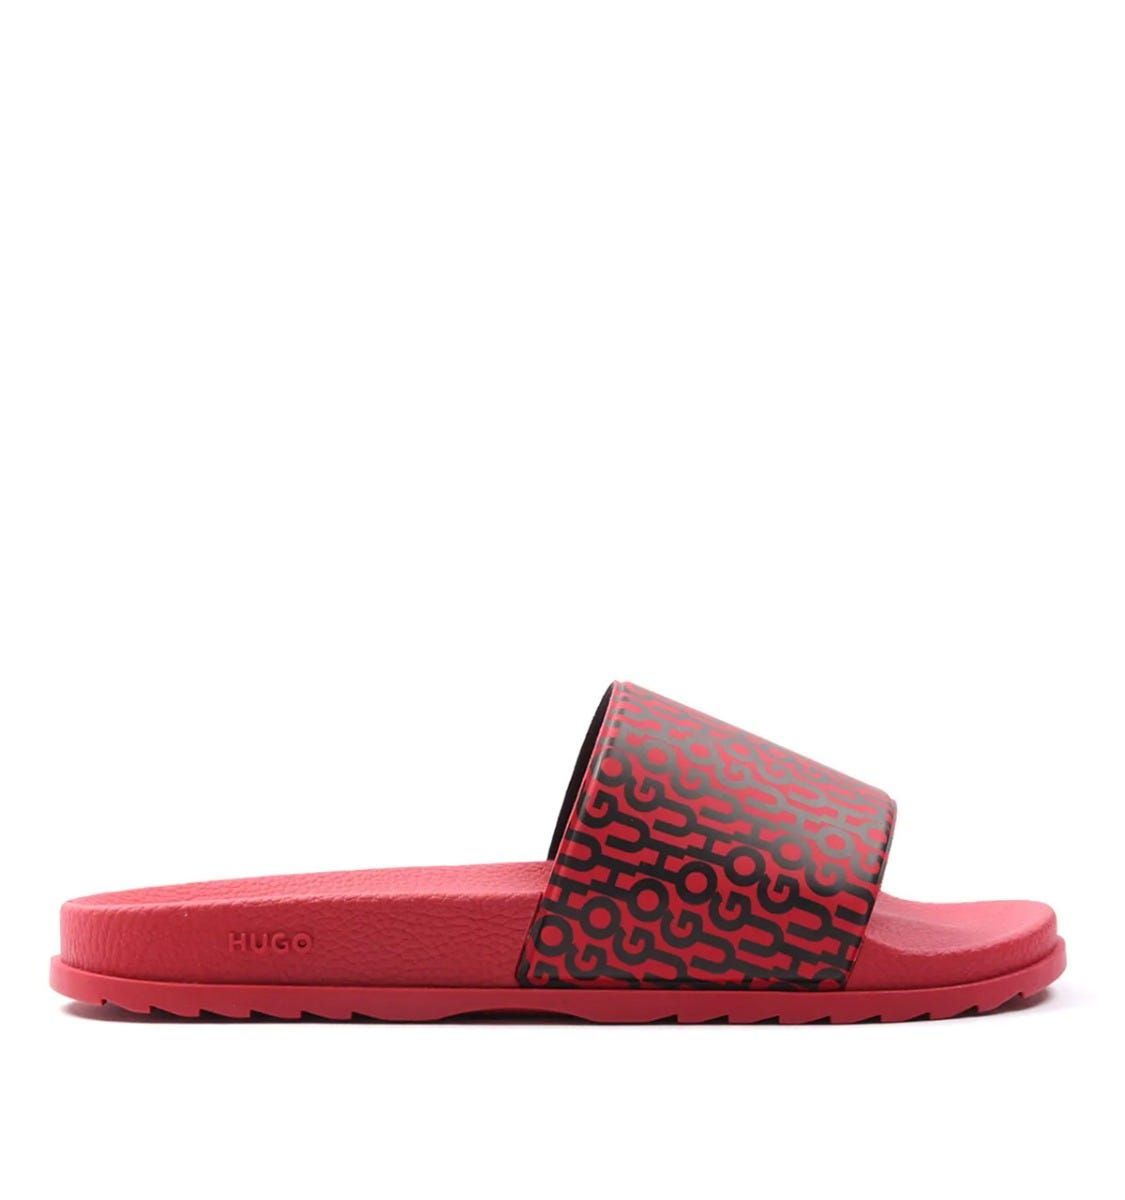 Slide your feet into standout style with the Match Slides from HUGO. These lightweight quicky drying slides are ready to make a statement with the iconic HUGO logo repeat printed across the rubberised foot straps.  Perfect for the pool, beach, garden or even lounging around. Featuring an ergonomically designed footbed for optimum comfort and a non slip outsole. Synthetic Rubber Composition, Ergonomic Designed Footbed, Non Slip Outsole, Made in Italy, HUGO Branding.